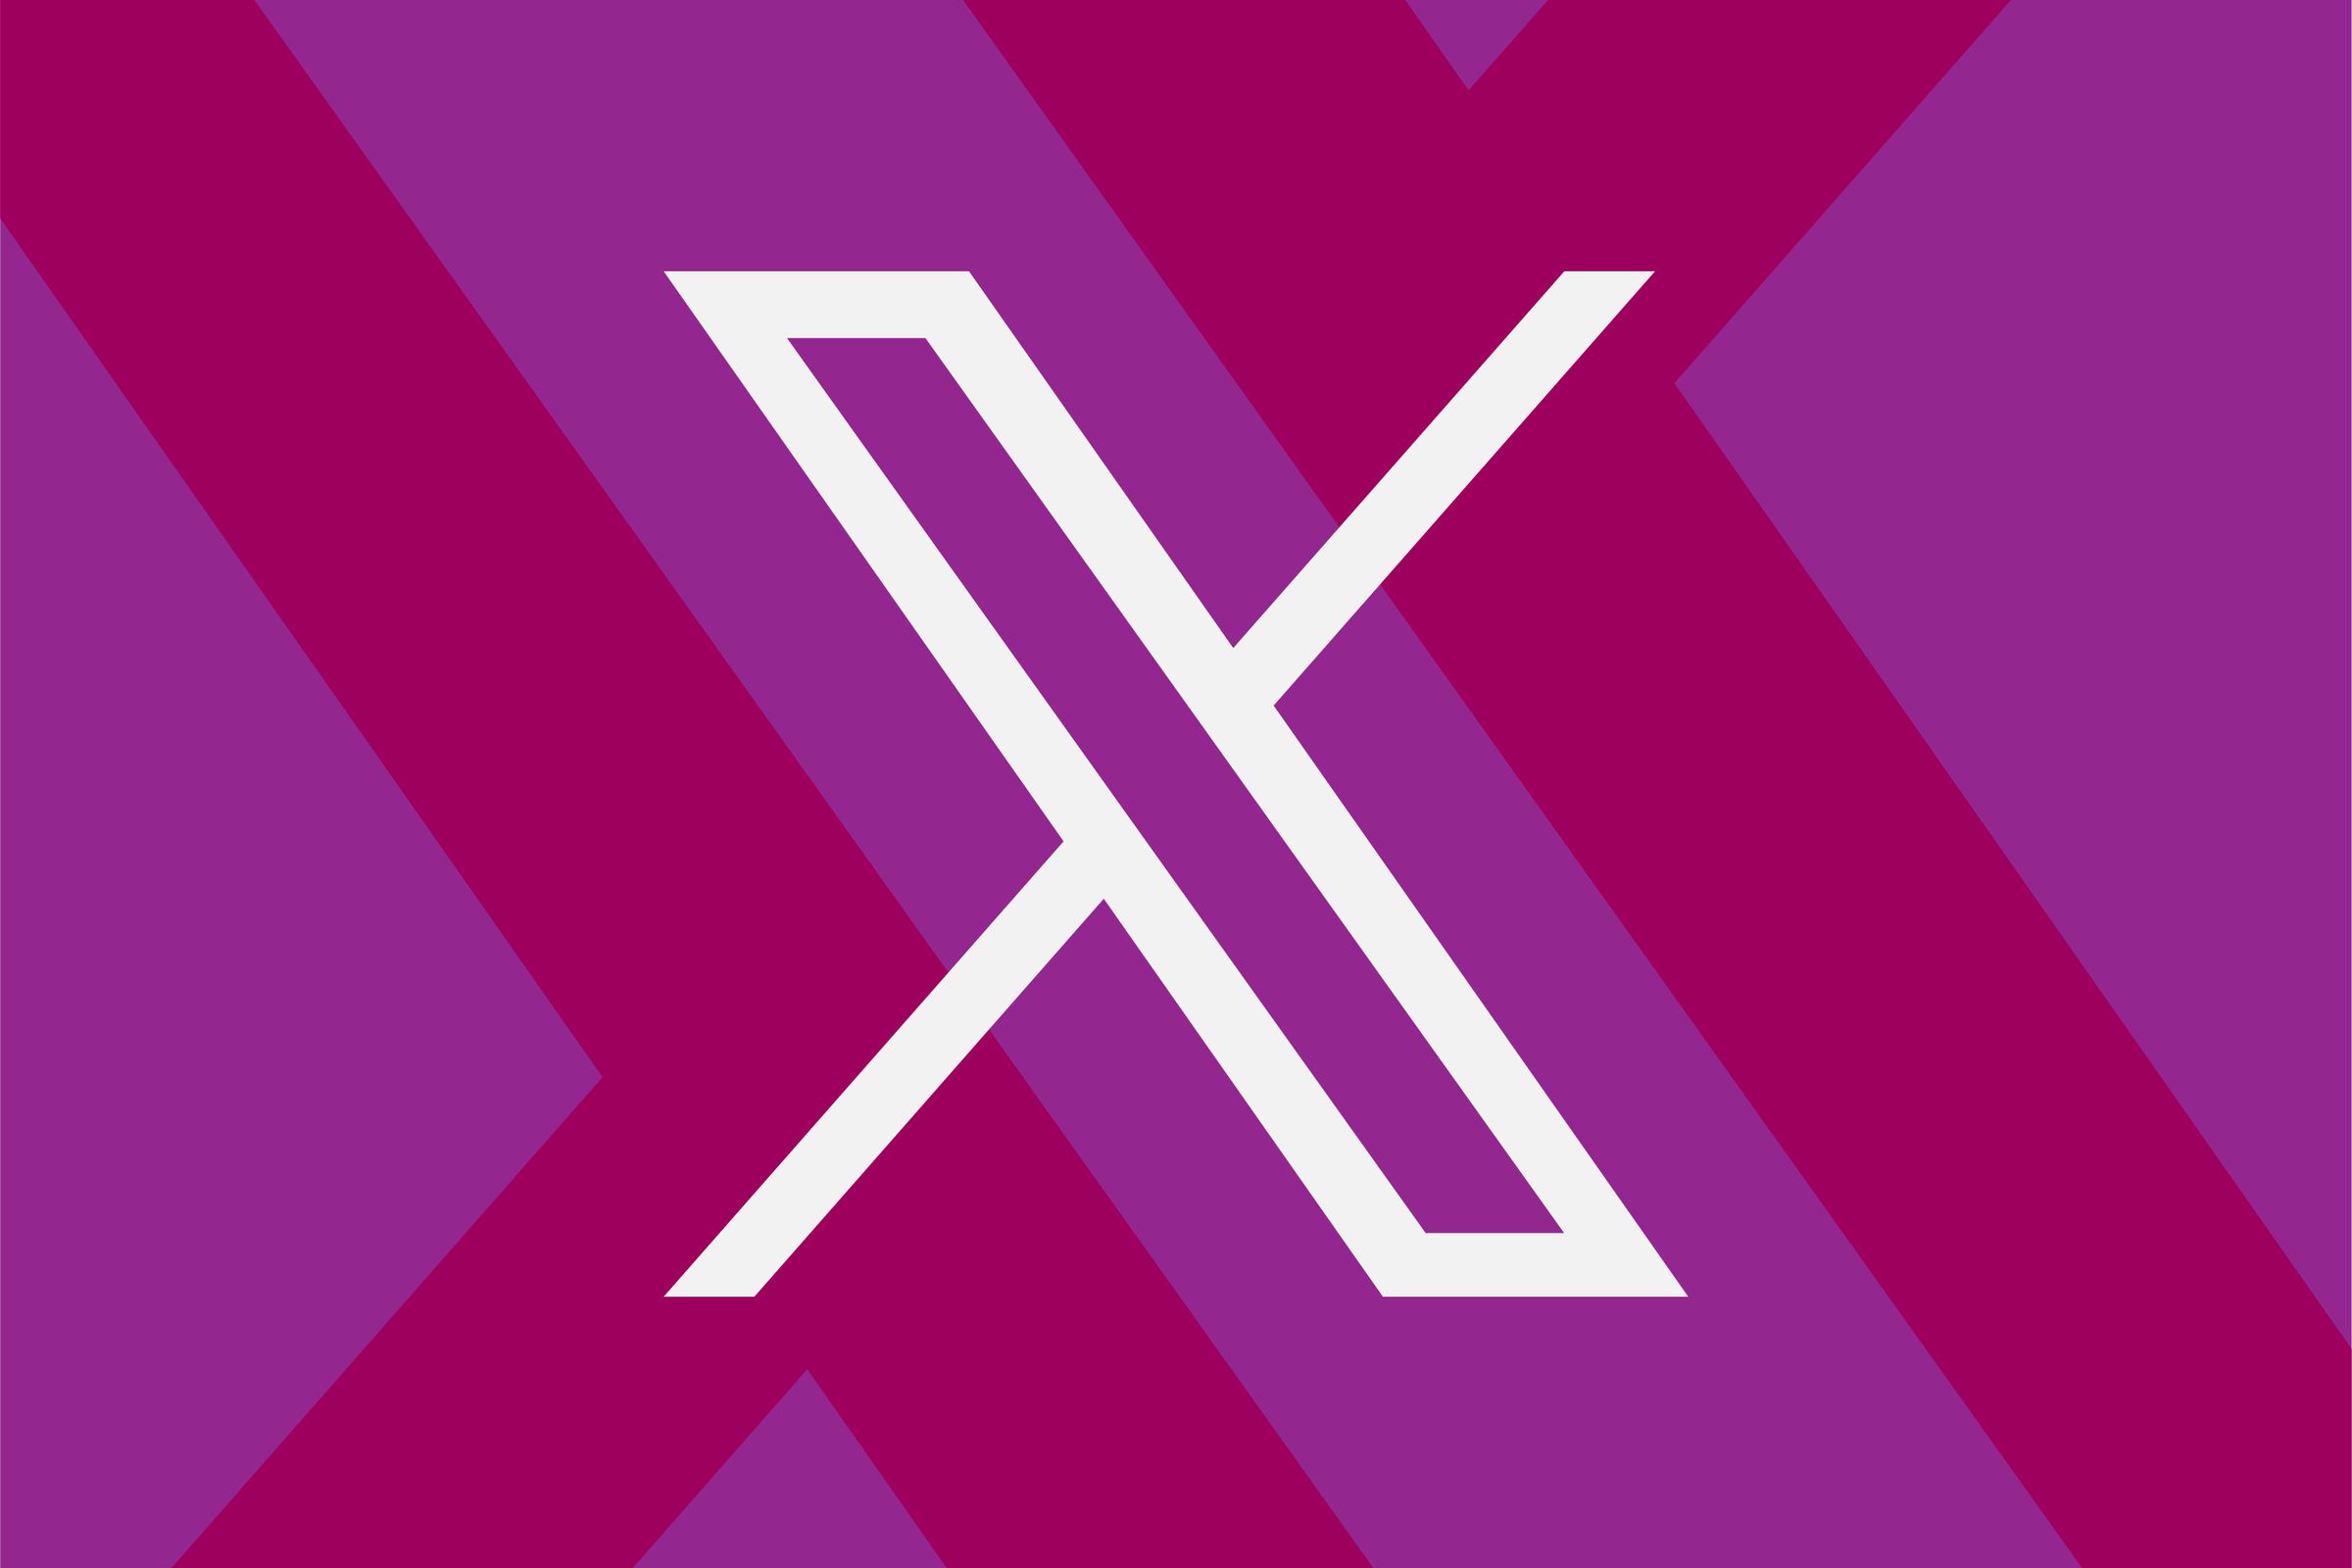 An image showing the X logo